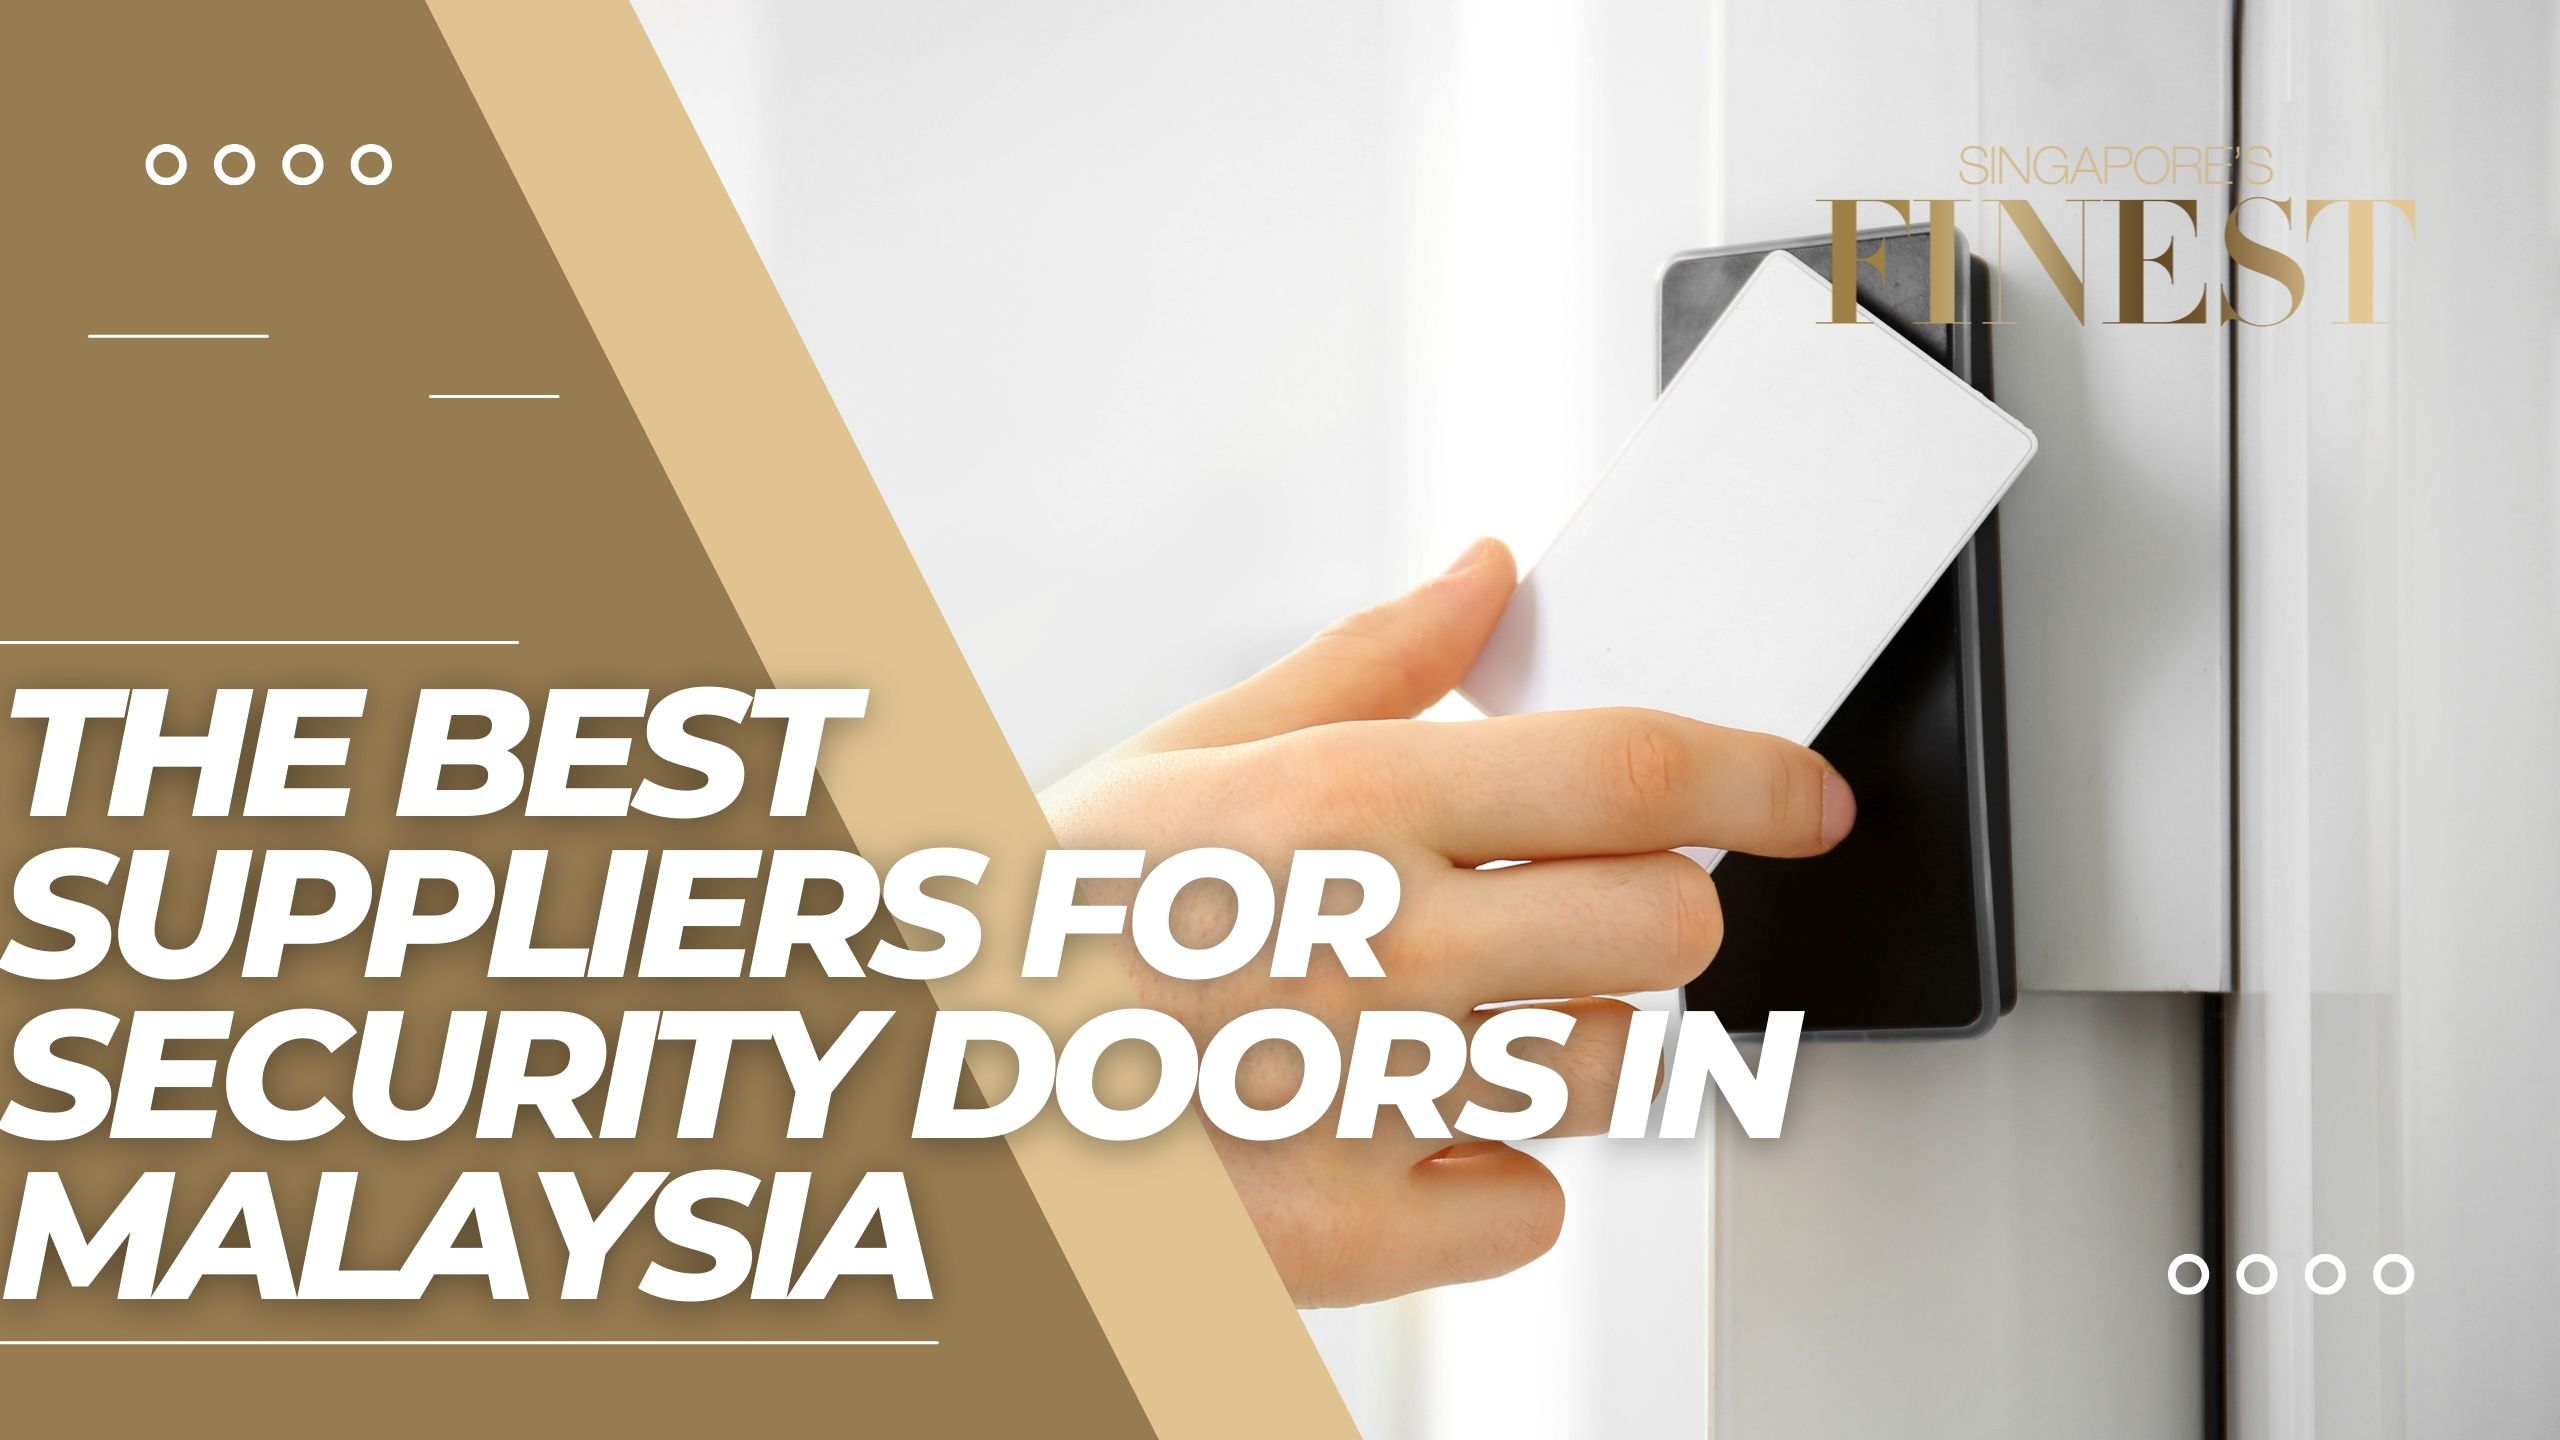 The Finest Suppliers for Security Doors in Malaysia